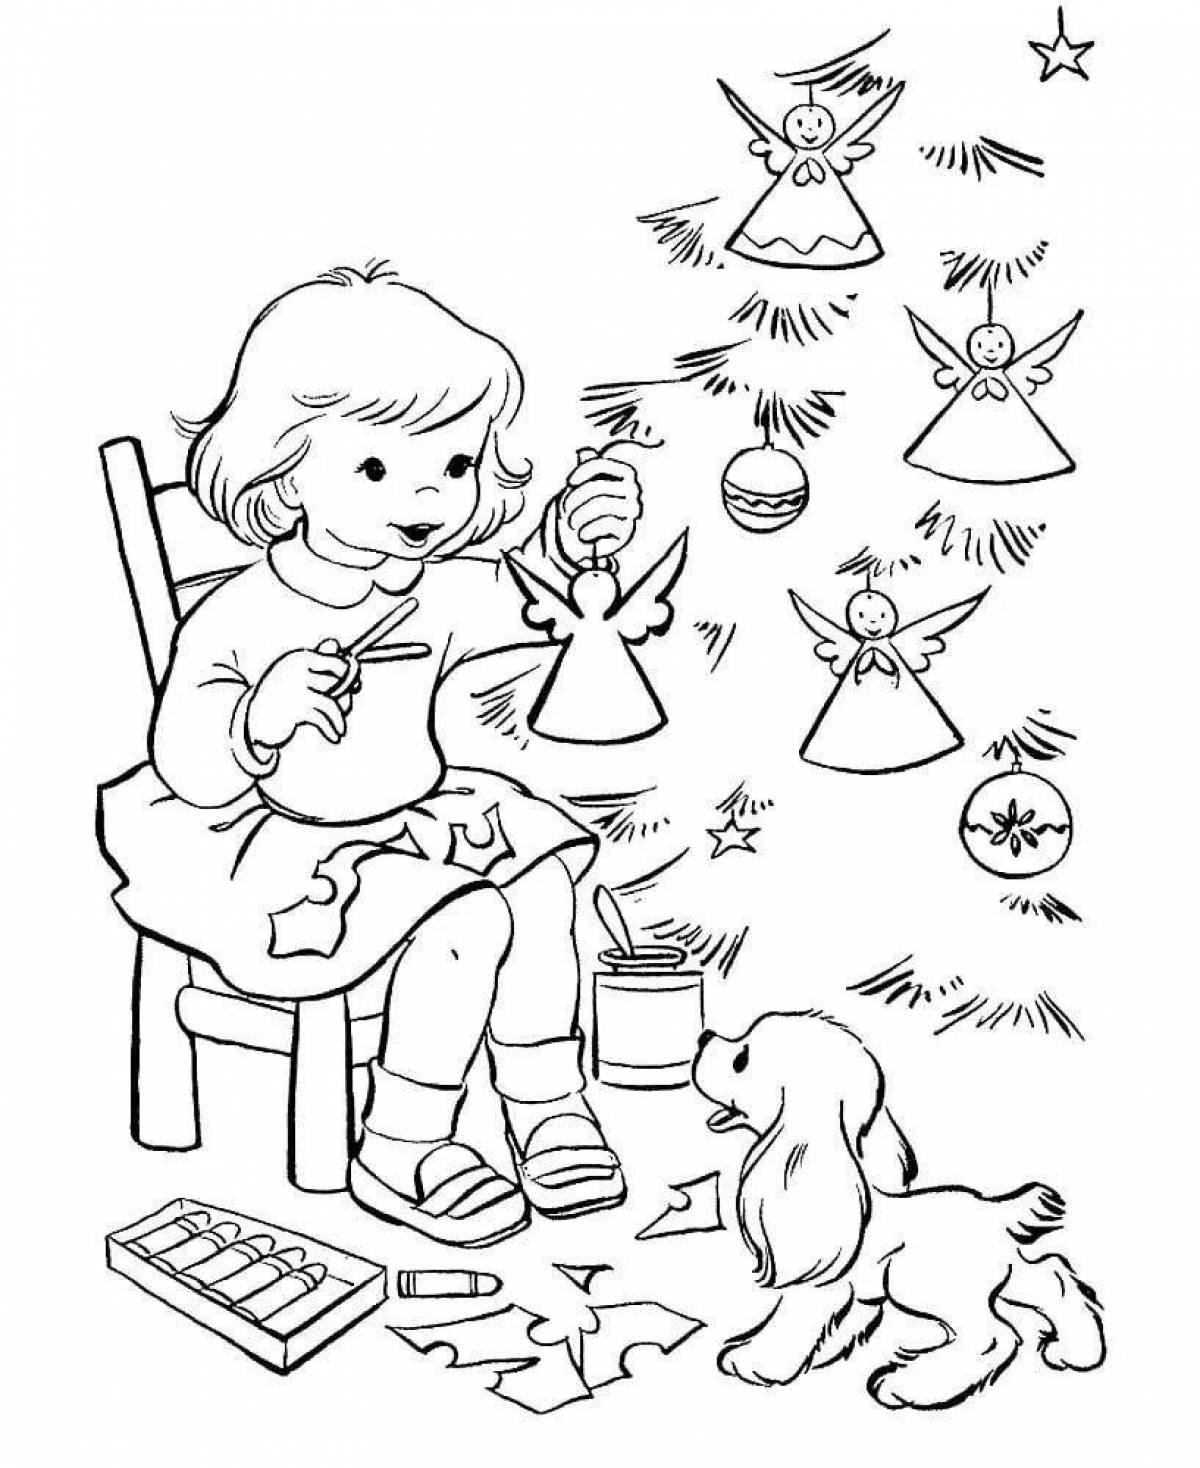 Colorful Christmas story coloring page